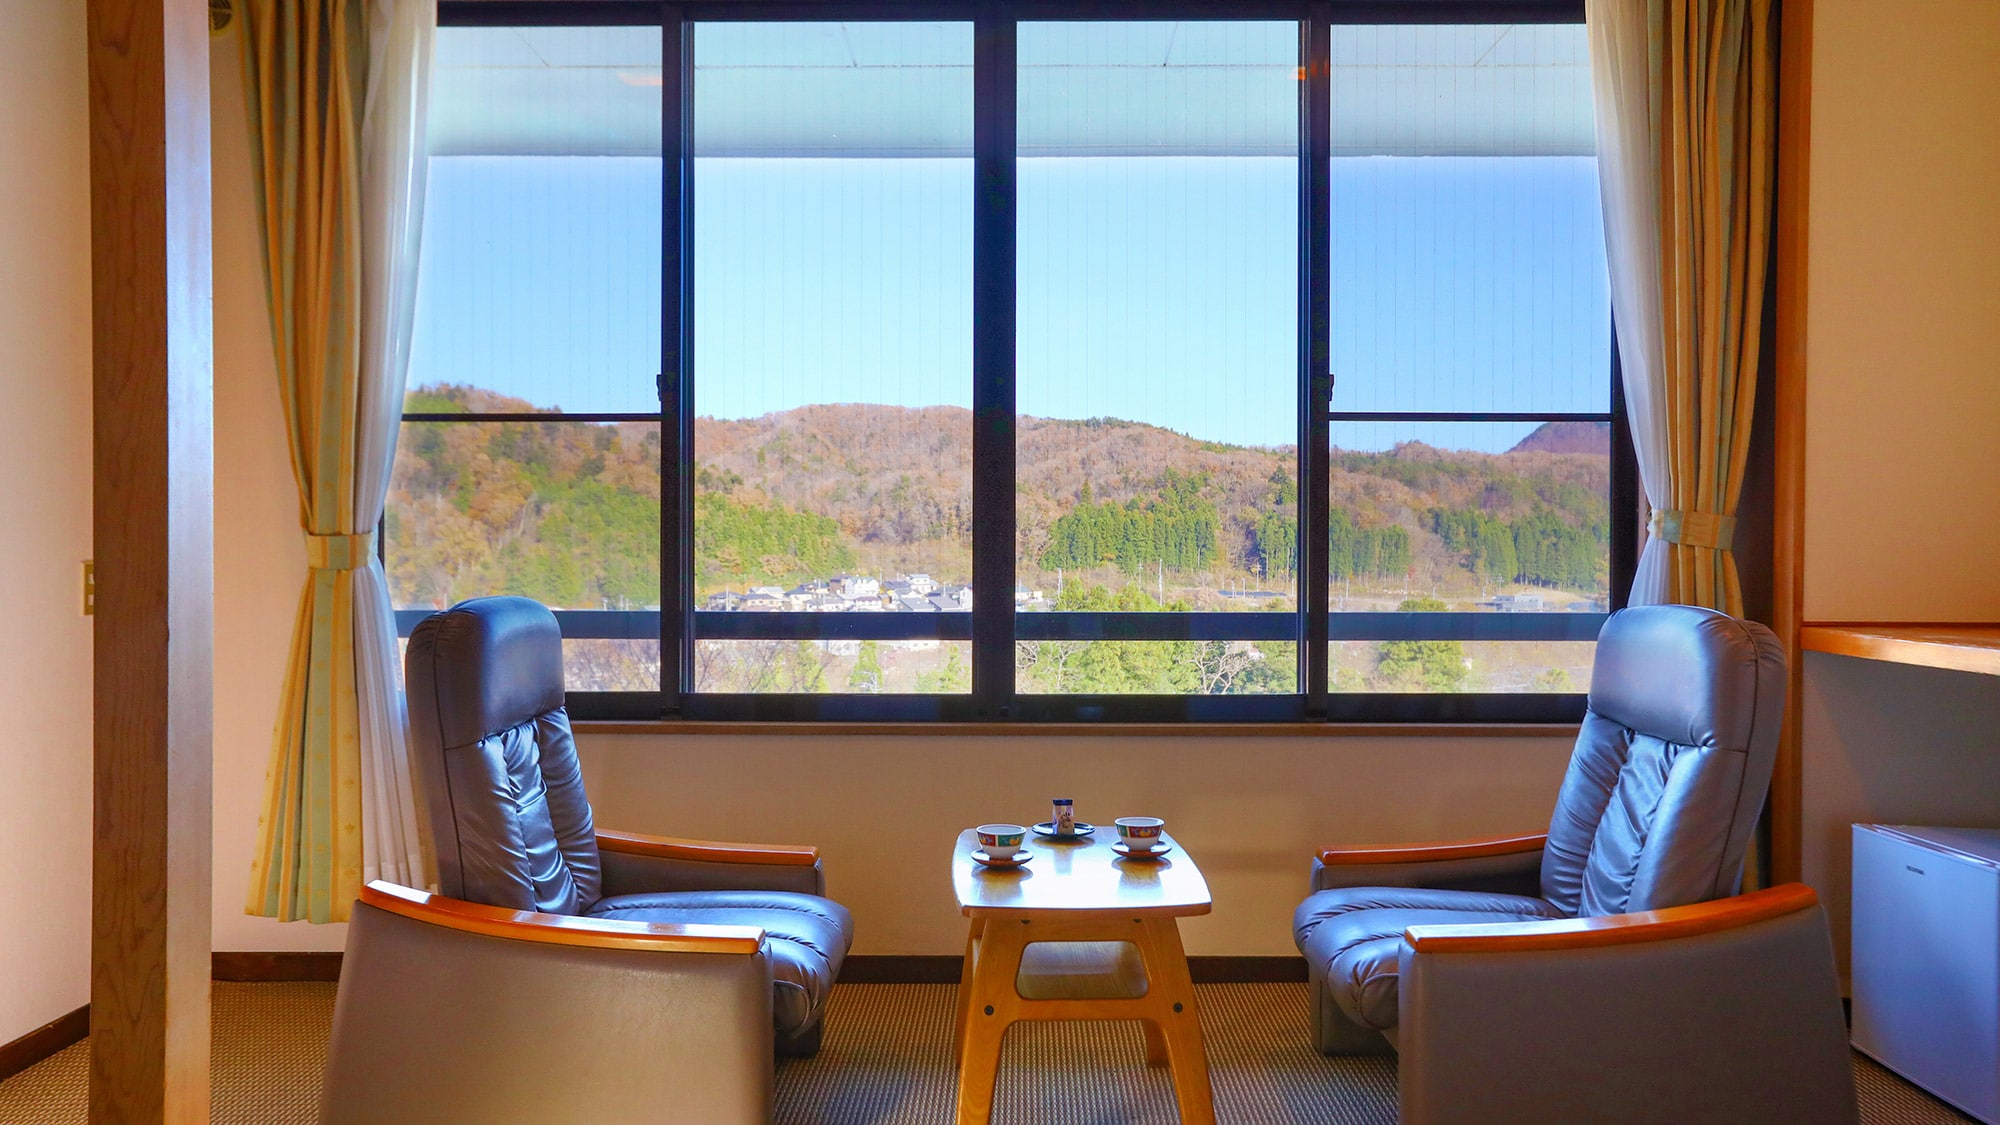 [Non-smoking] Japanese-style room 10 tatami mats + 3 tatami mats (example) & hellip; You can overlook the nature of Akiu from the window.